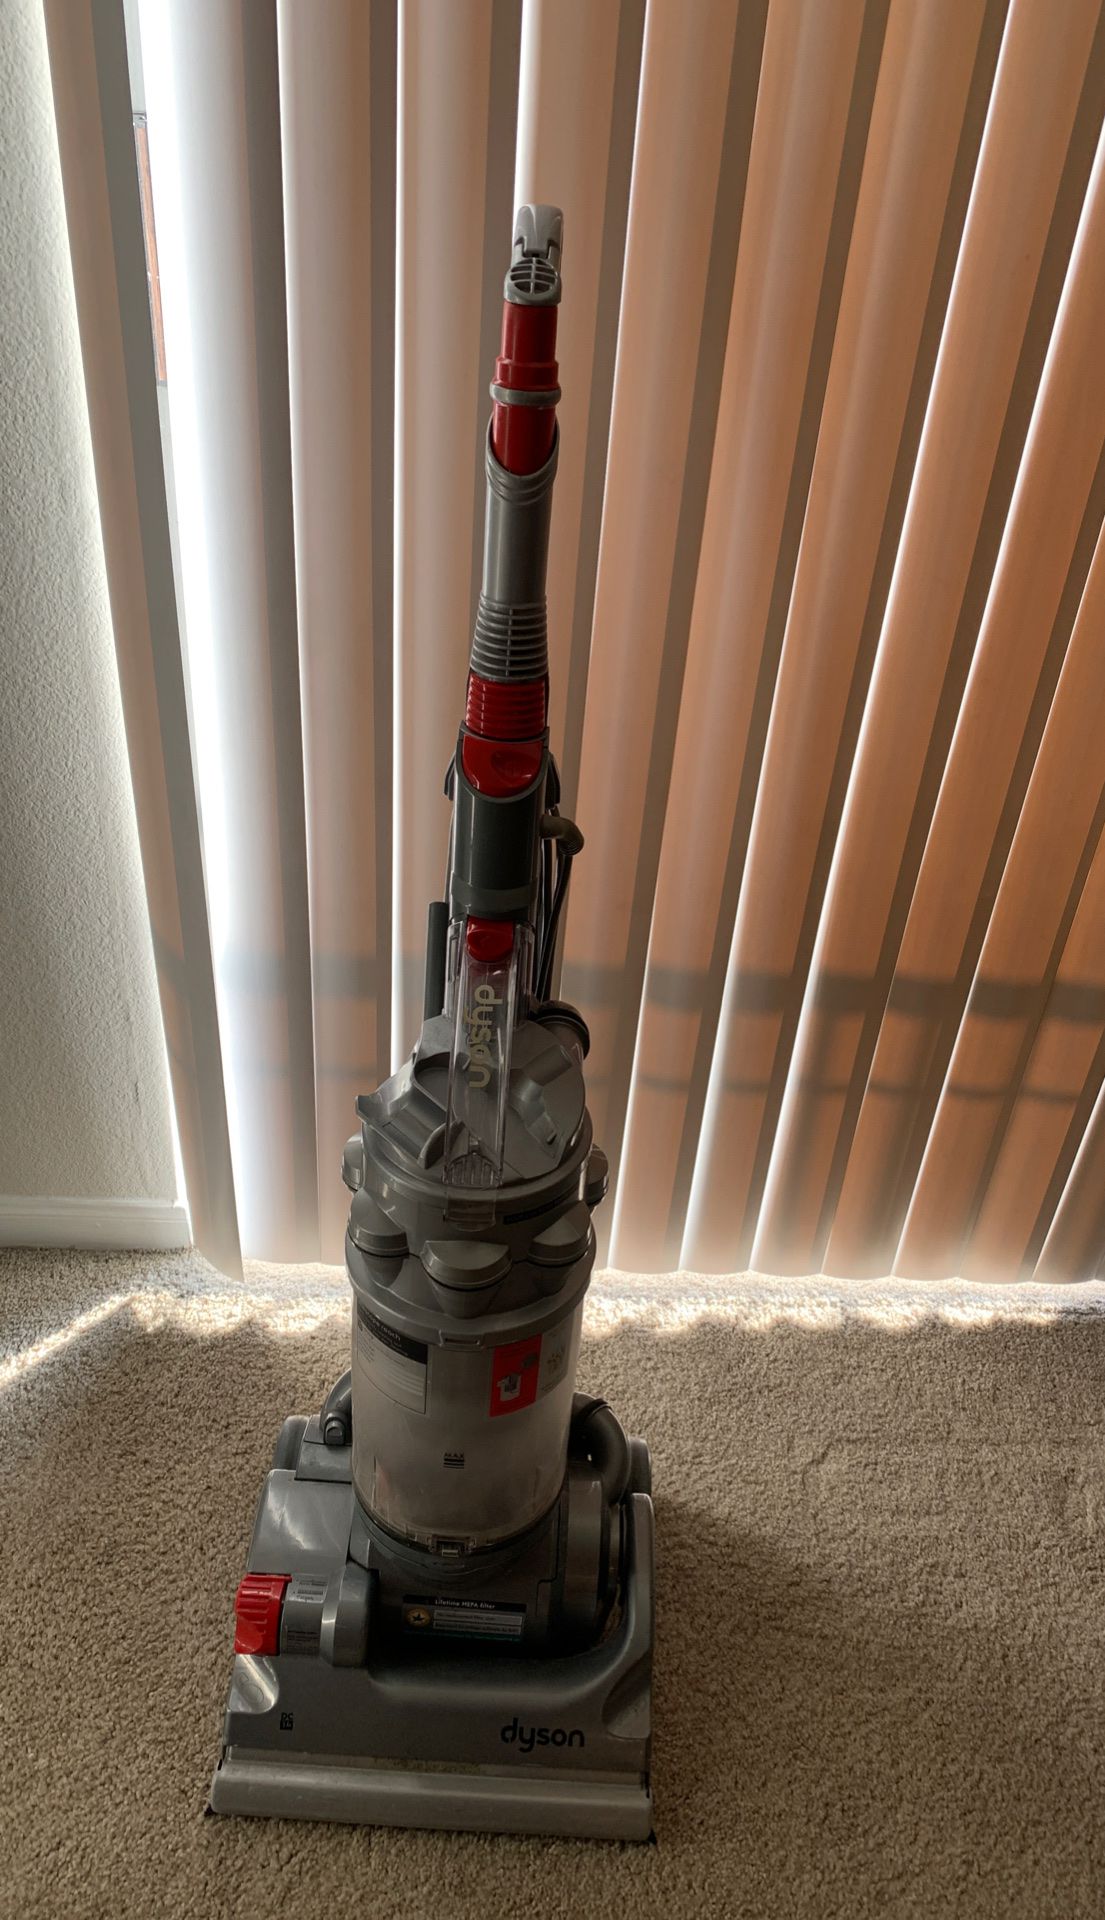 $300+ Dyson Vacuum— Moving and need gone this morning!